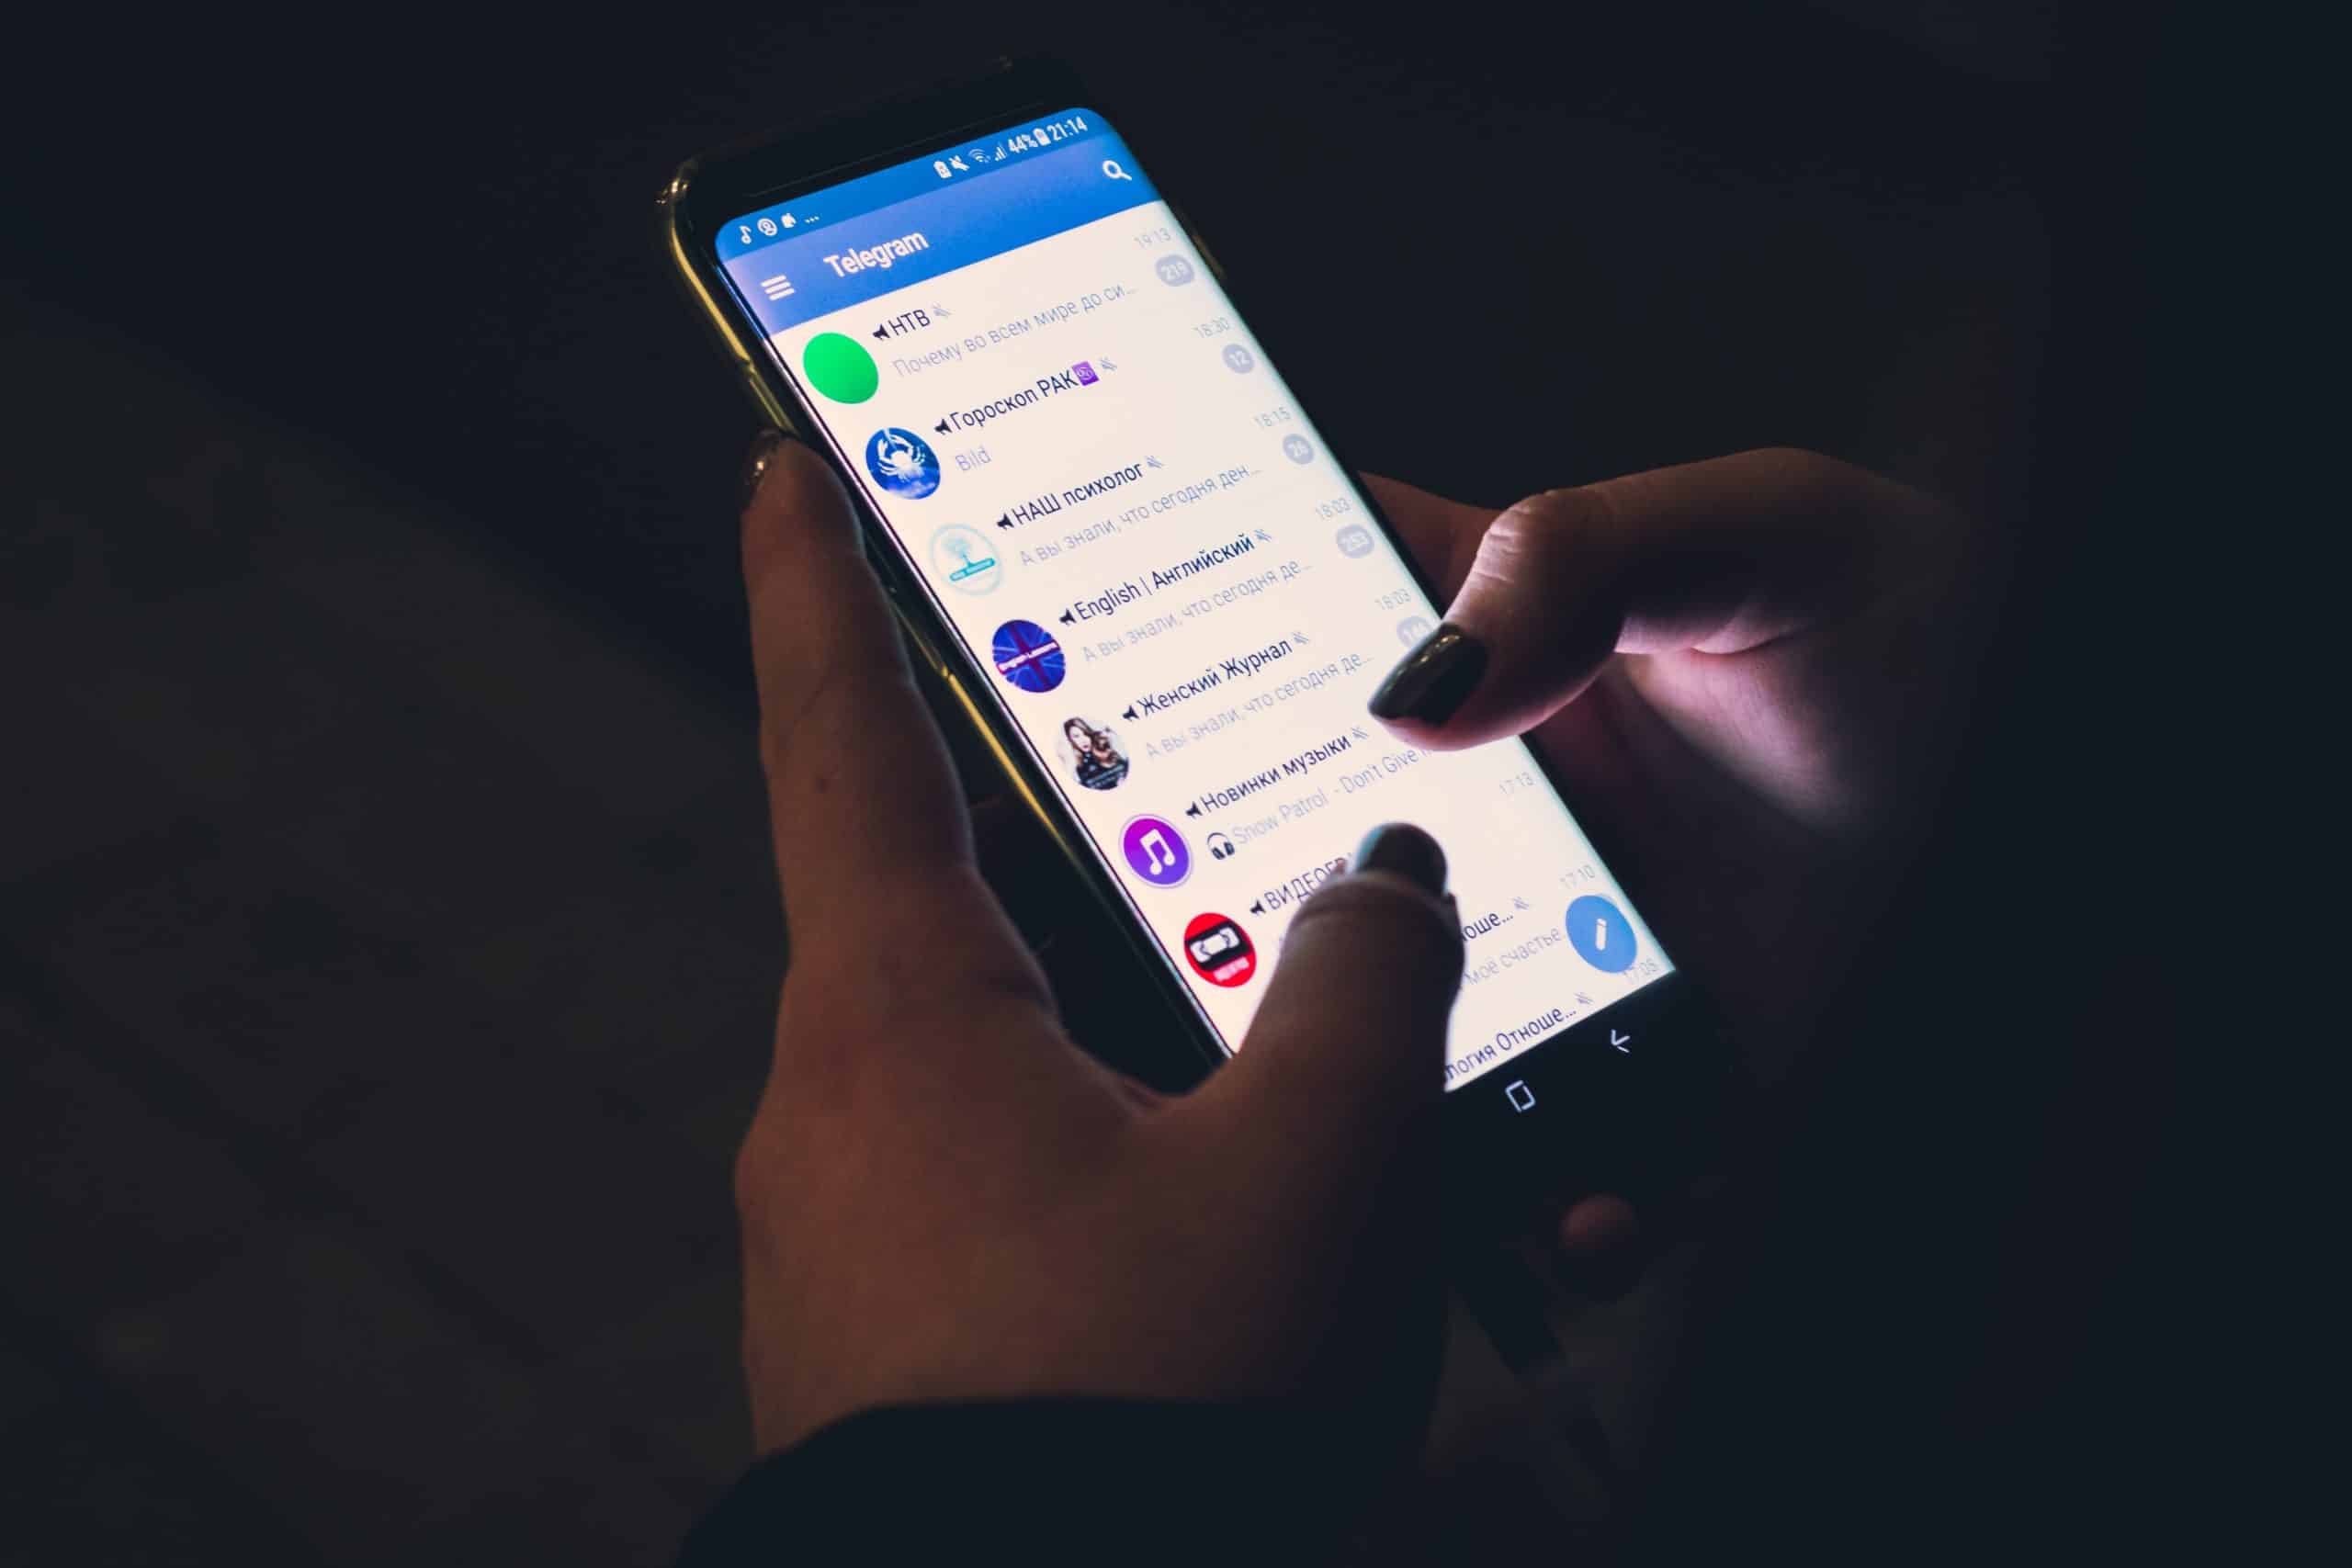 How to download and set up the Telegram app